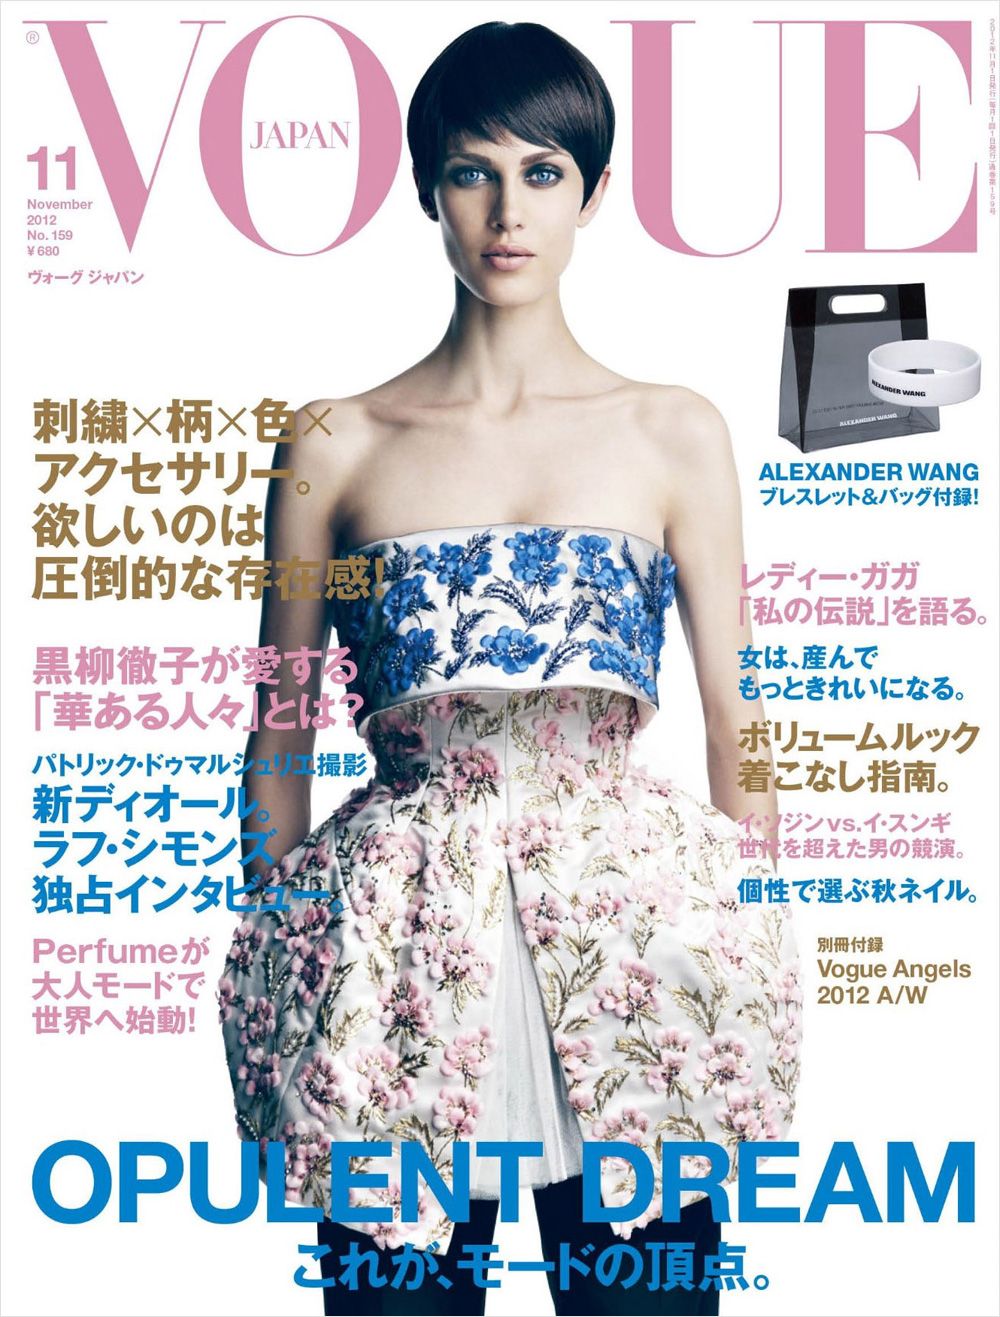 In Vogue 1 Day- Fashion & more...: Vogue Japan 2012 November issue